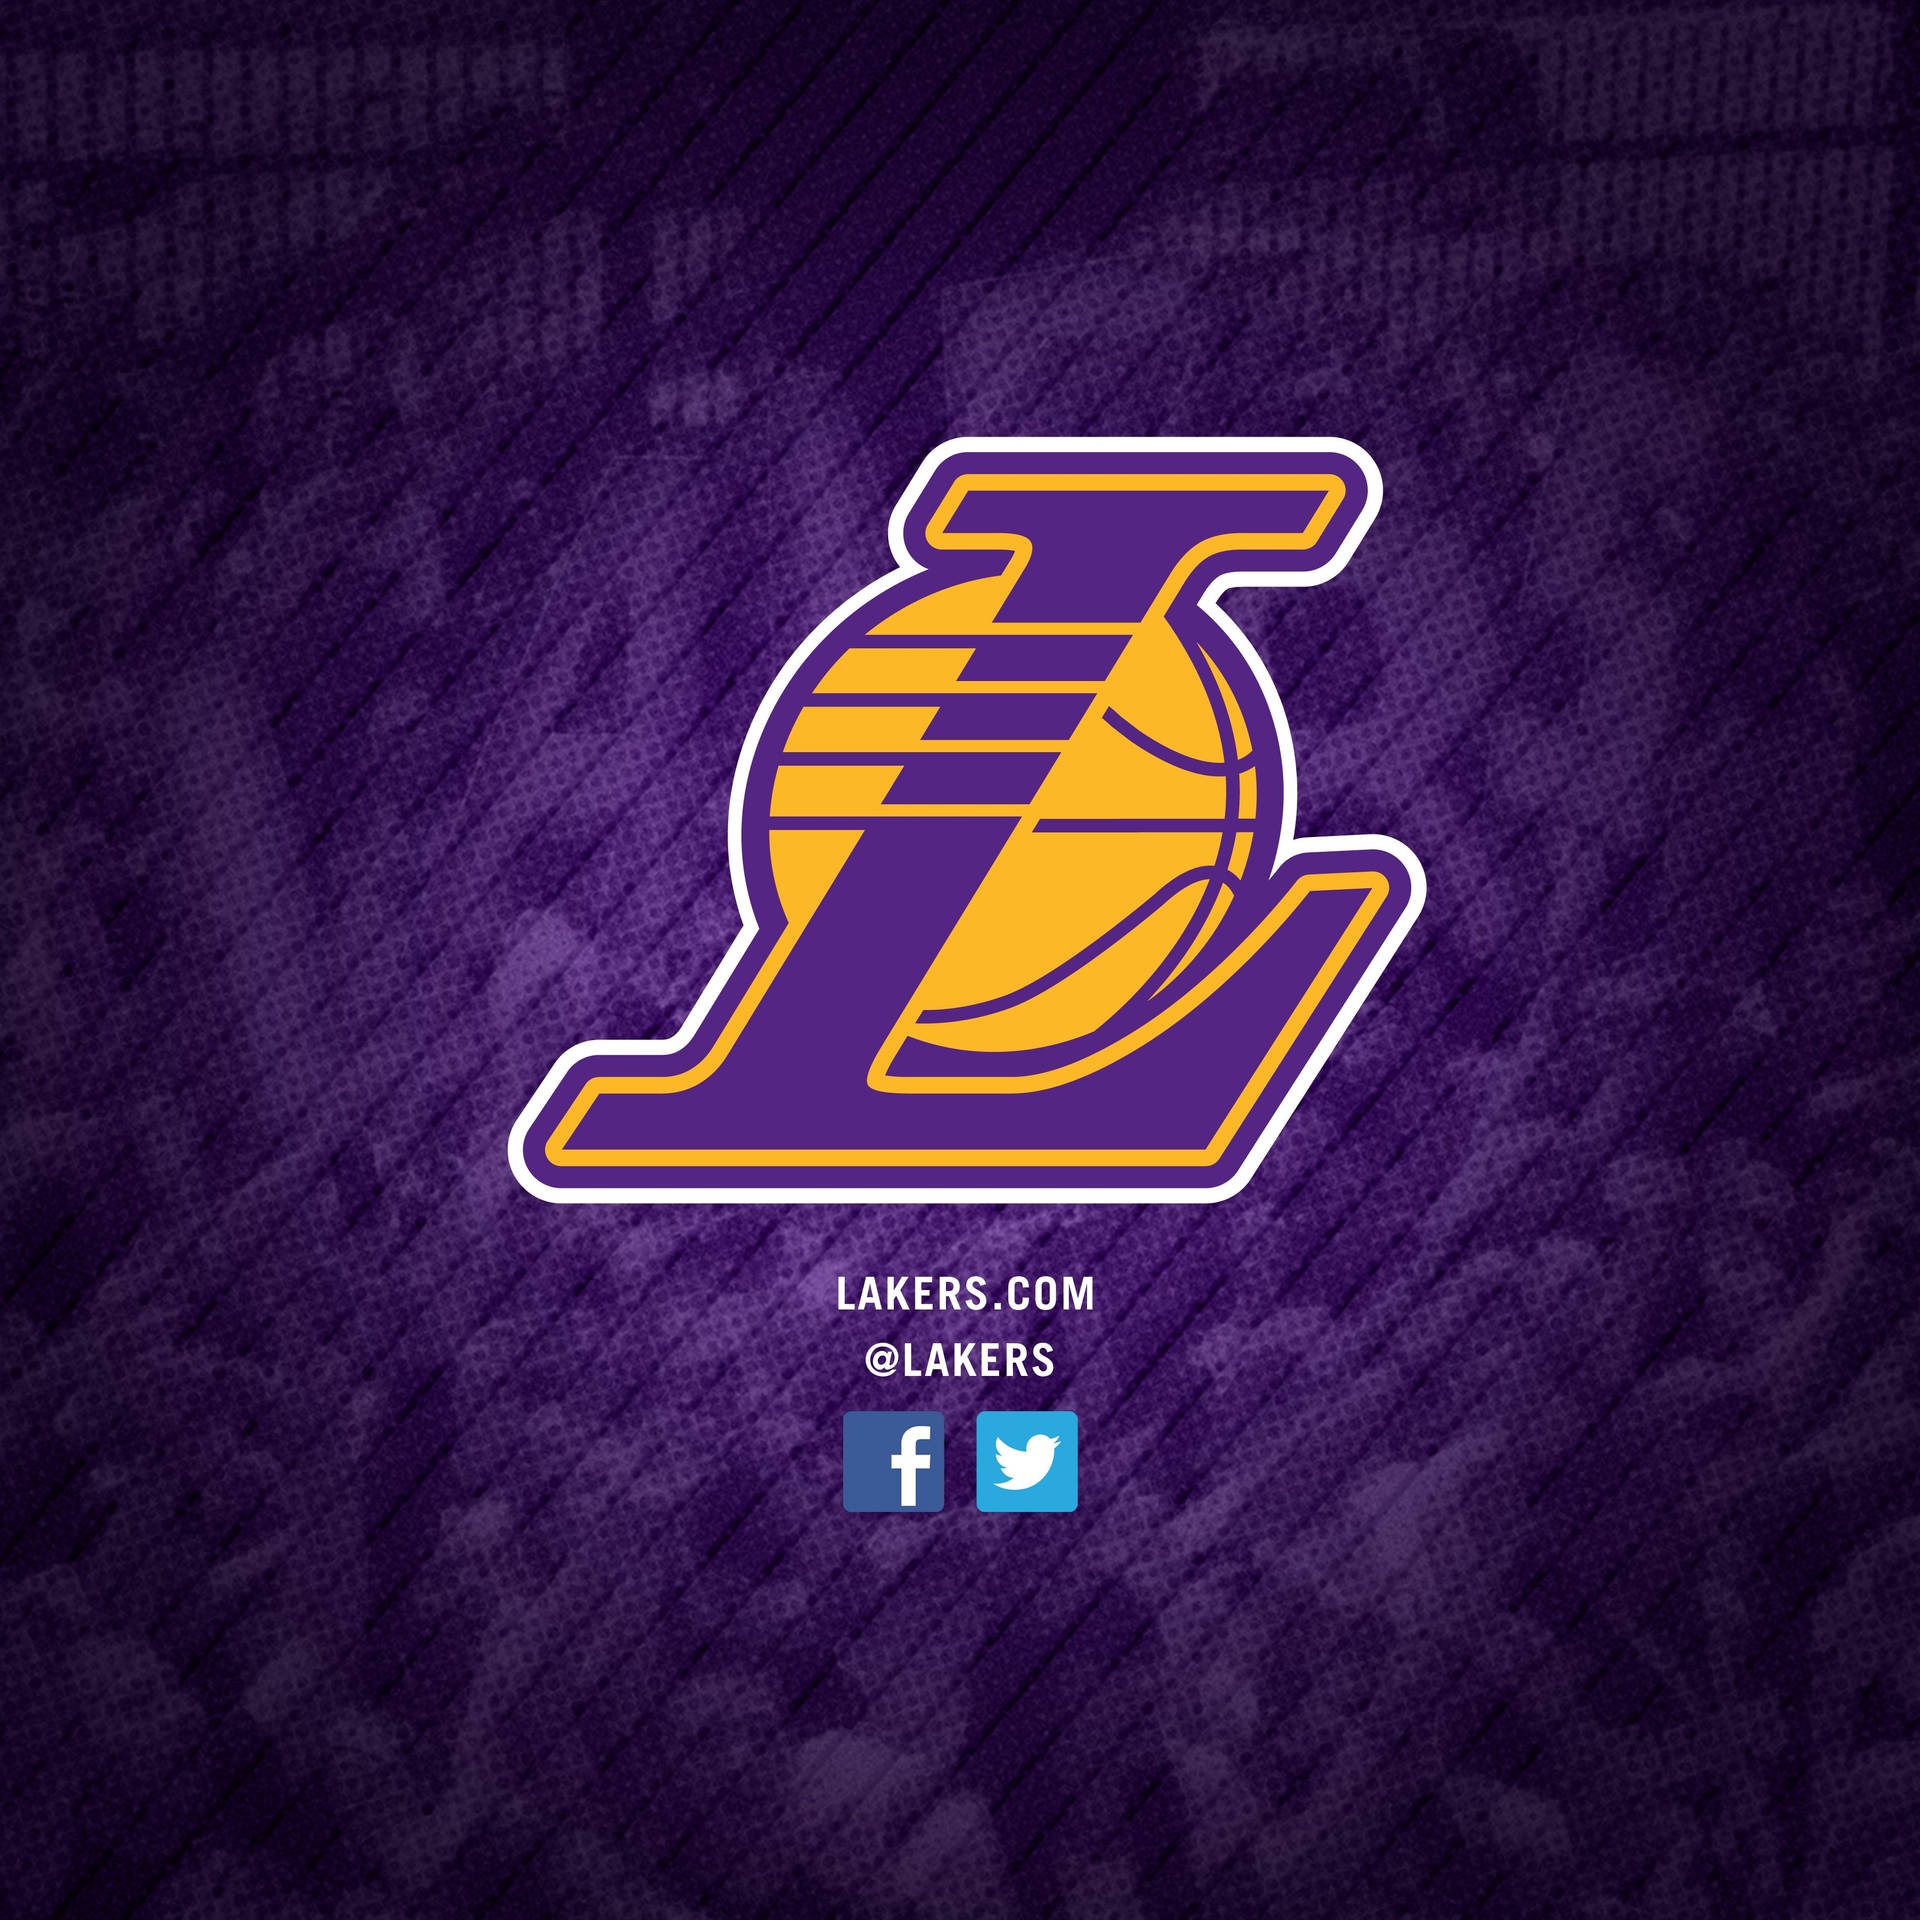 Lakers wallpapers download